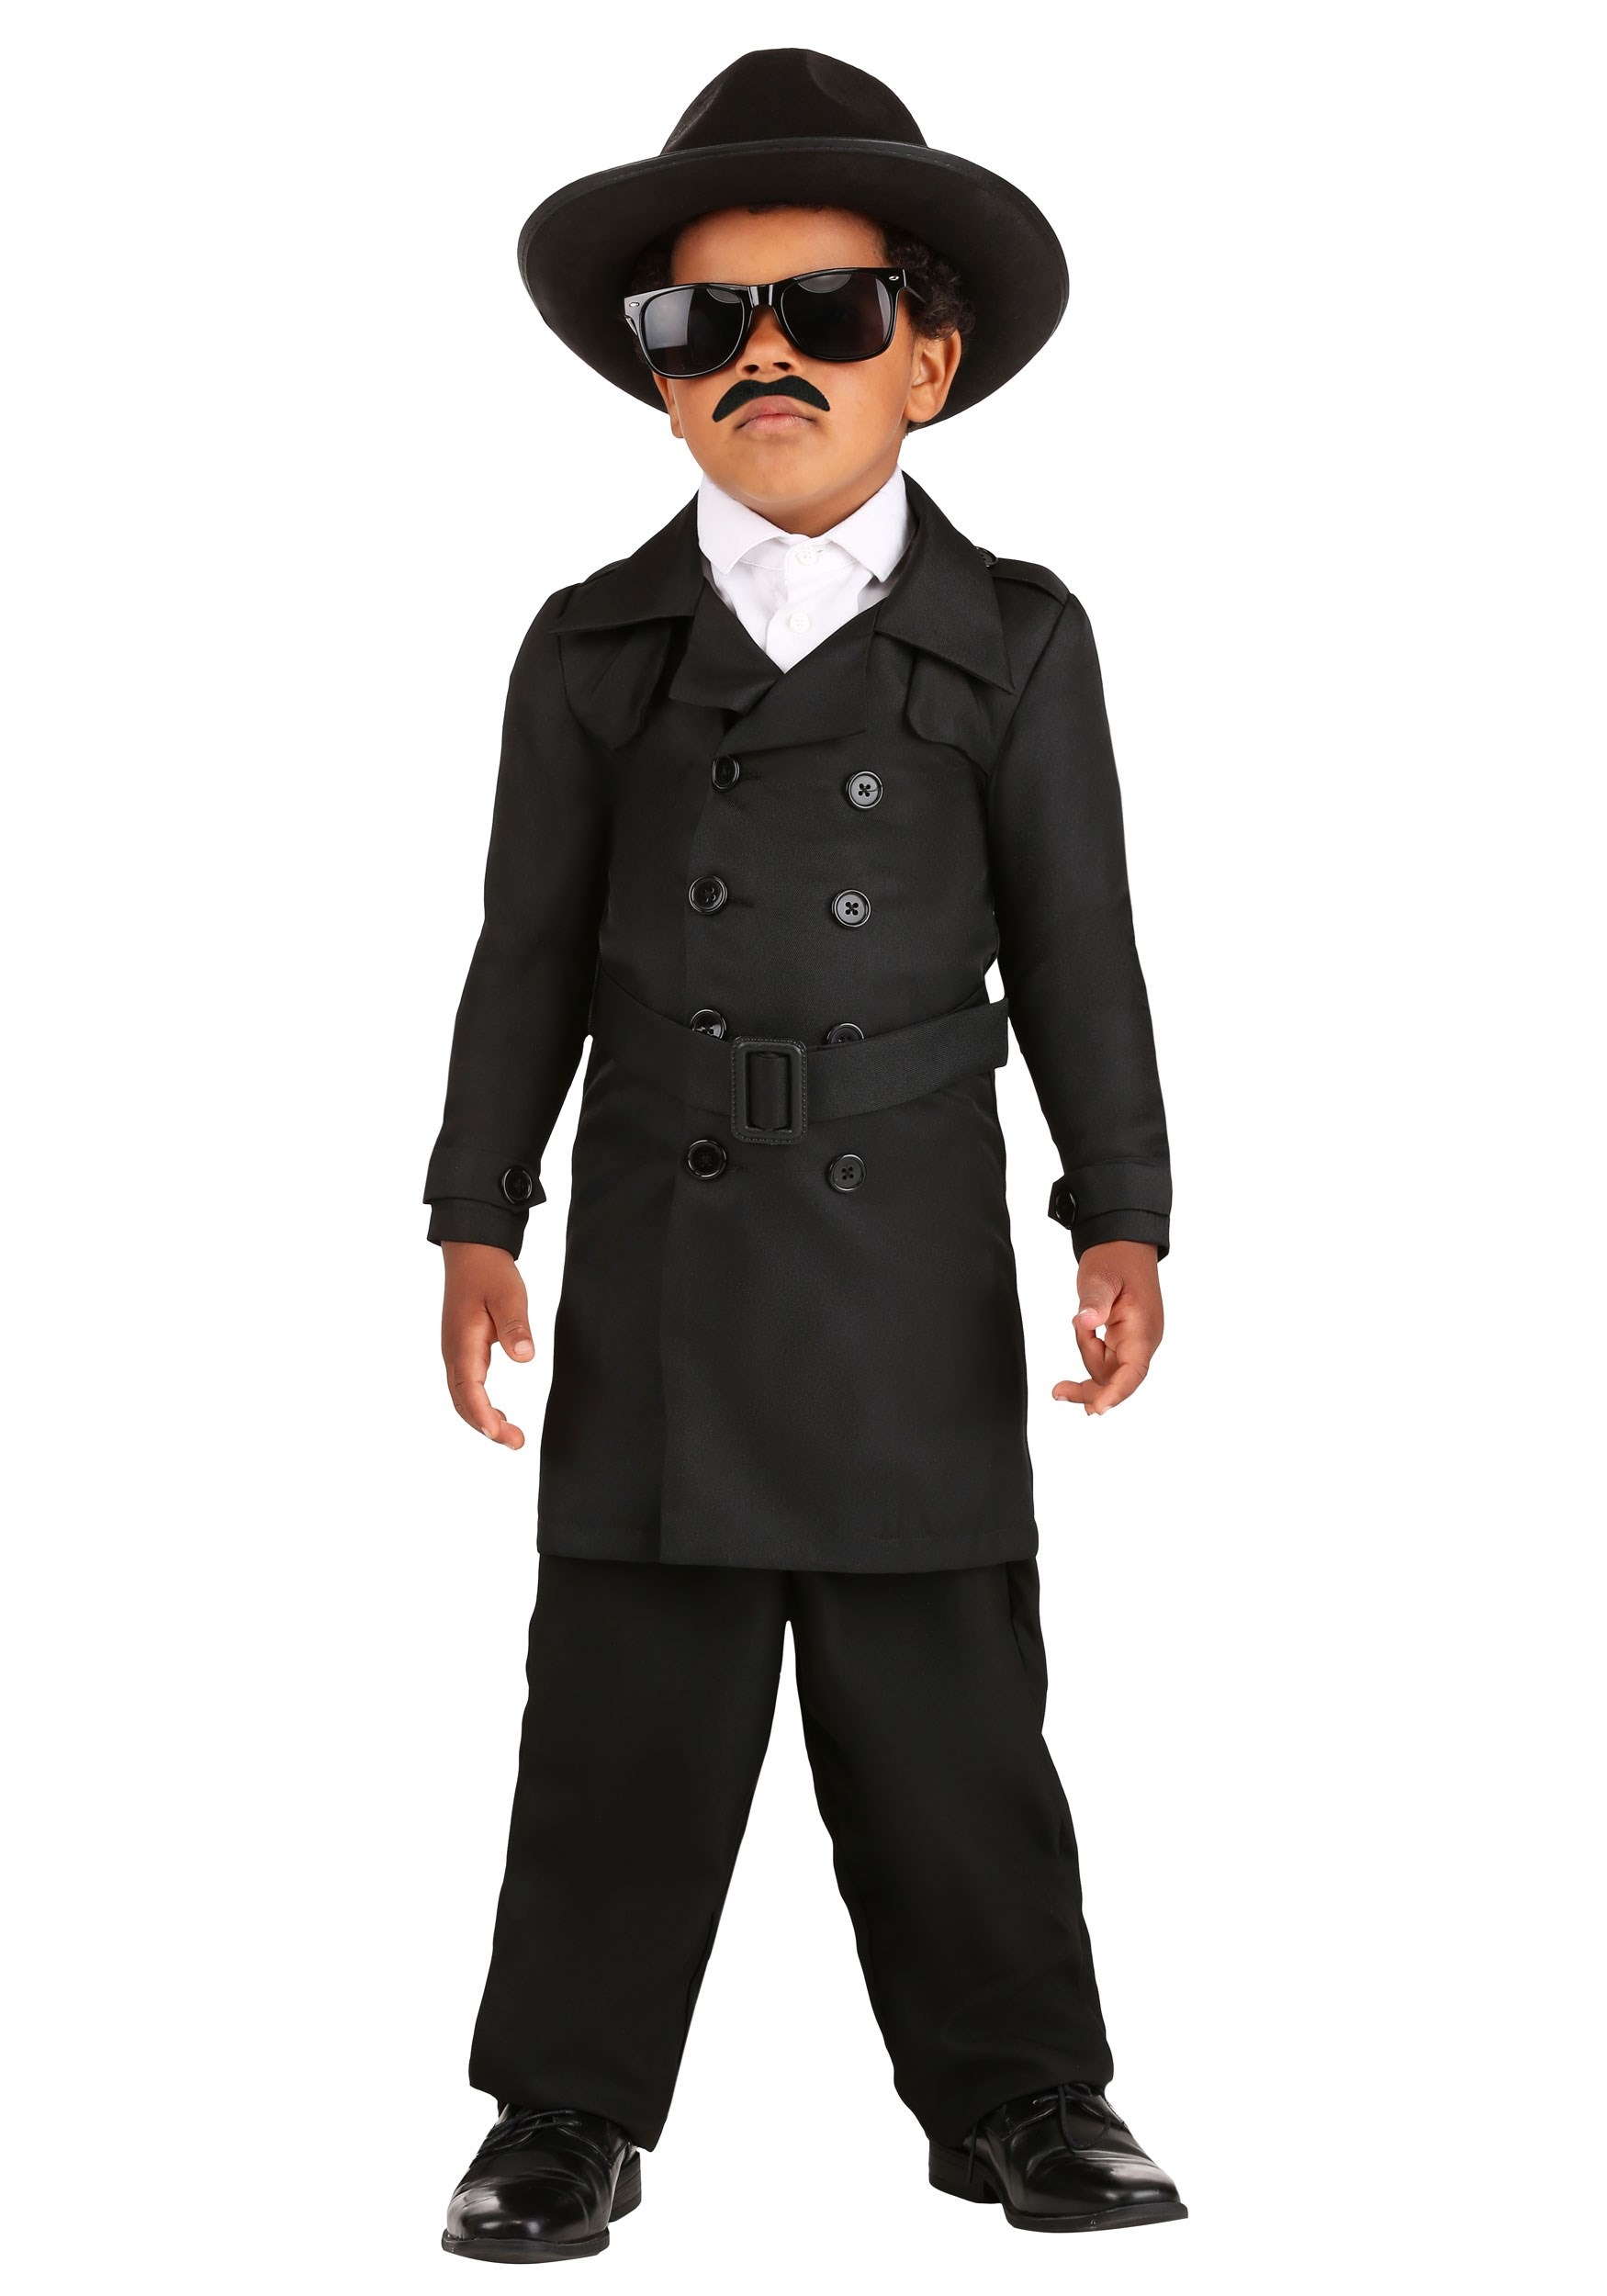 Photos - Fancy Dress Secret FUN Costumes  Agent Man Costume for Toddlers Black 